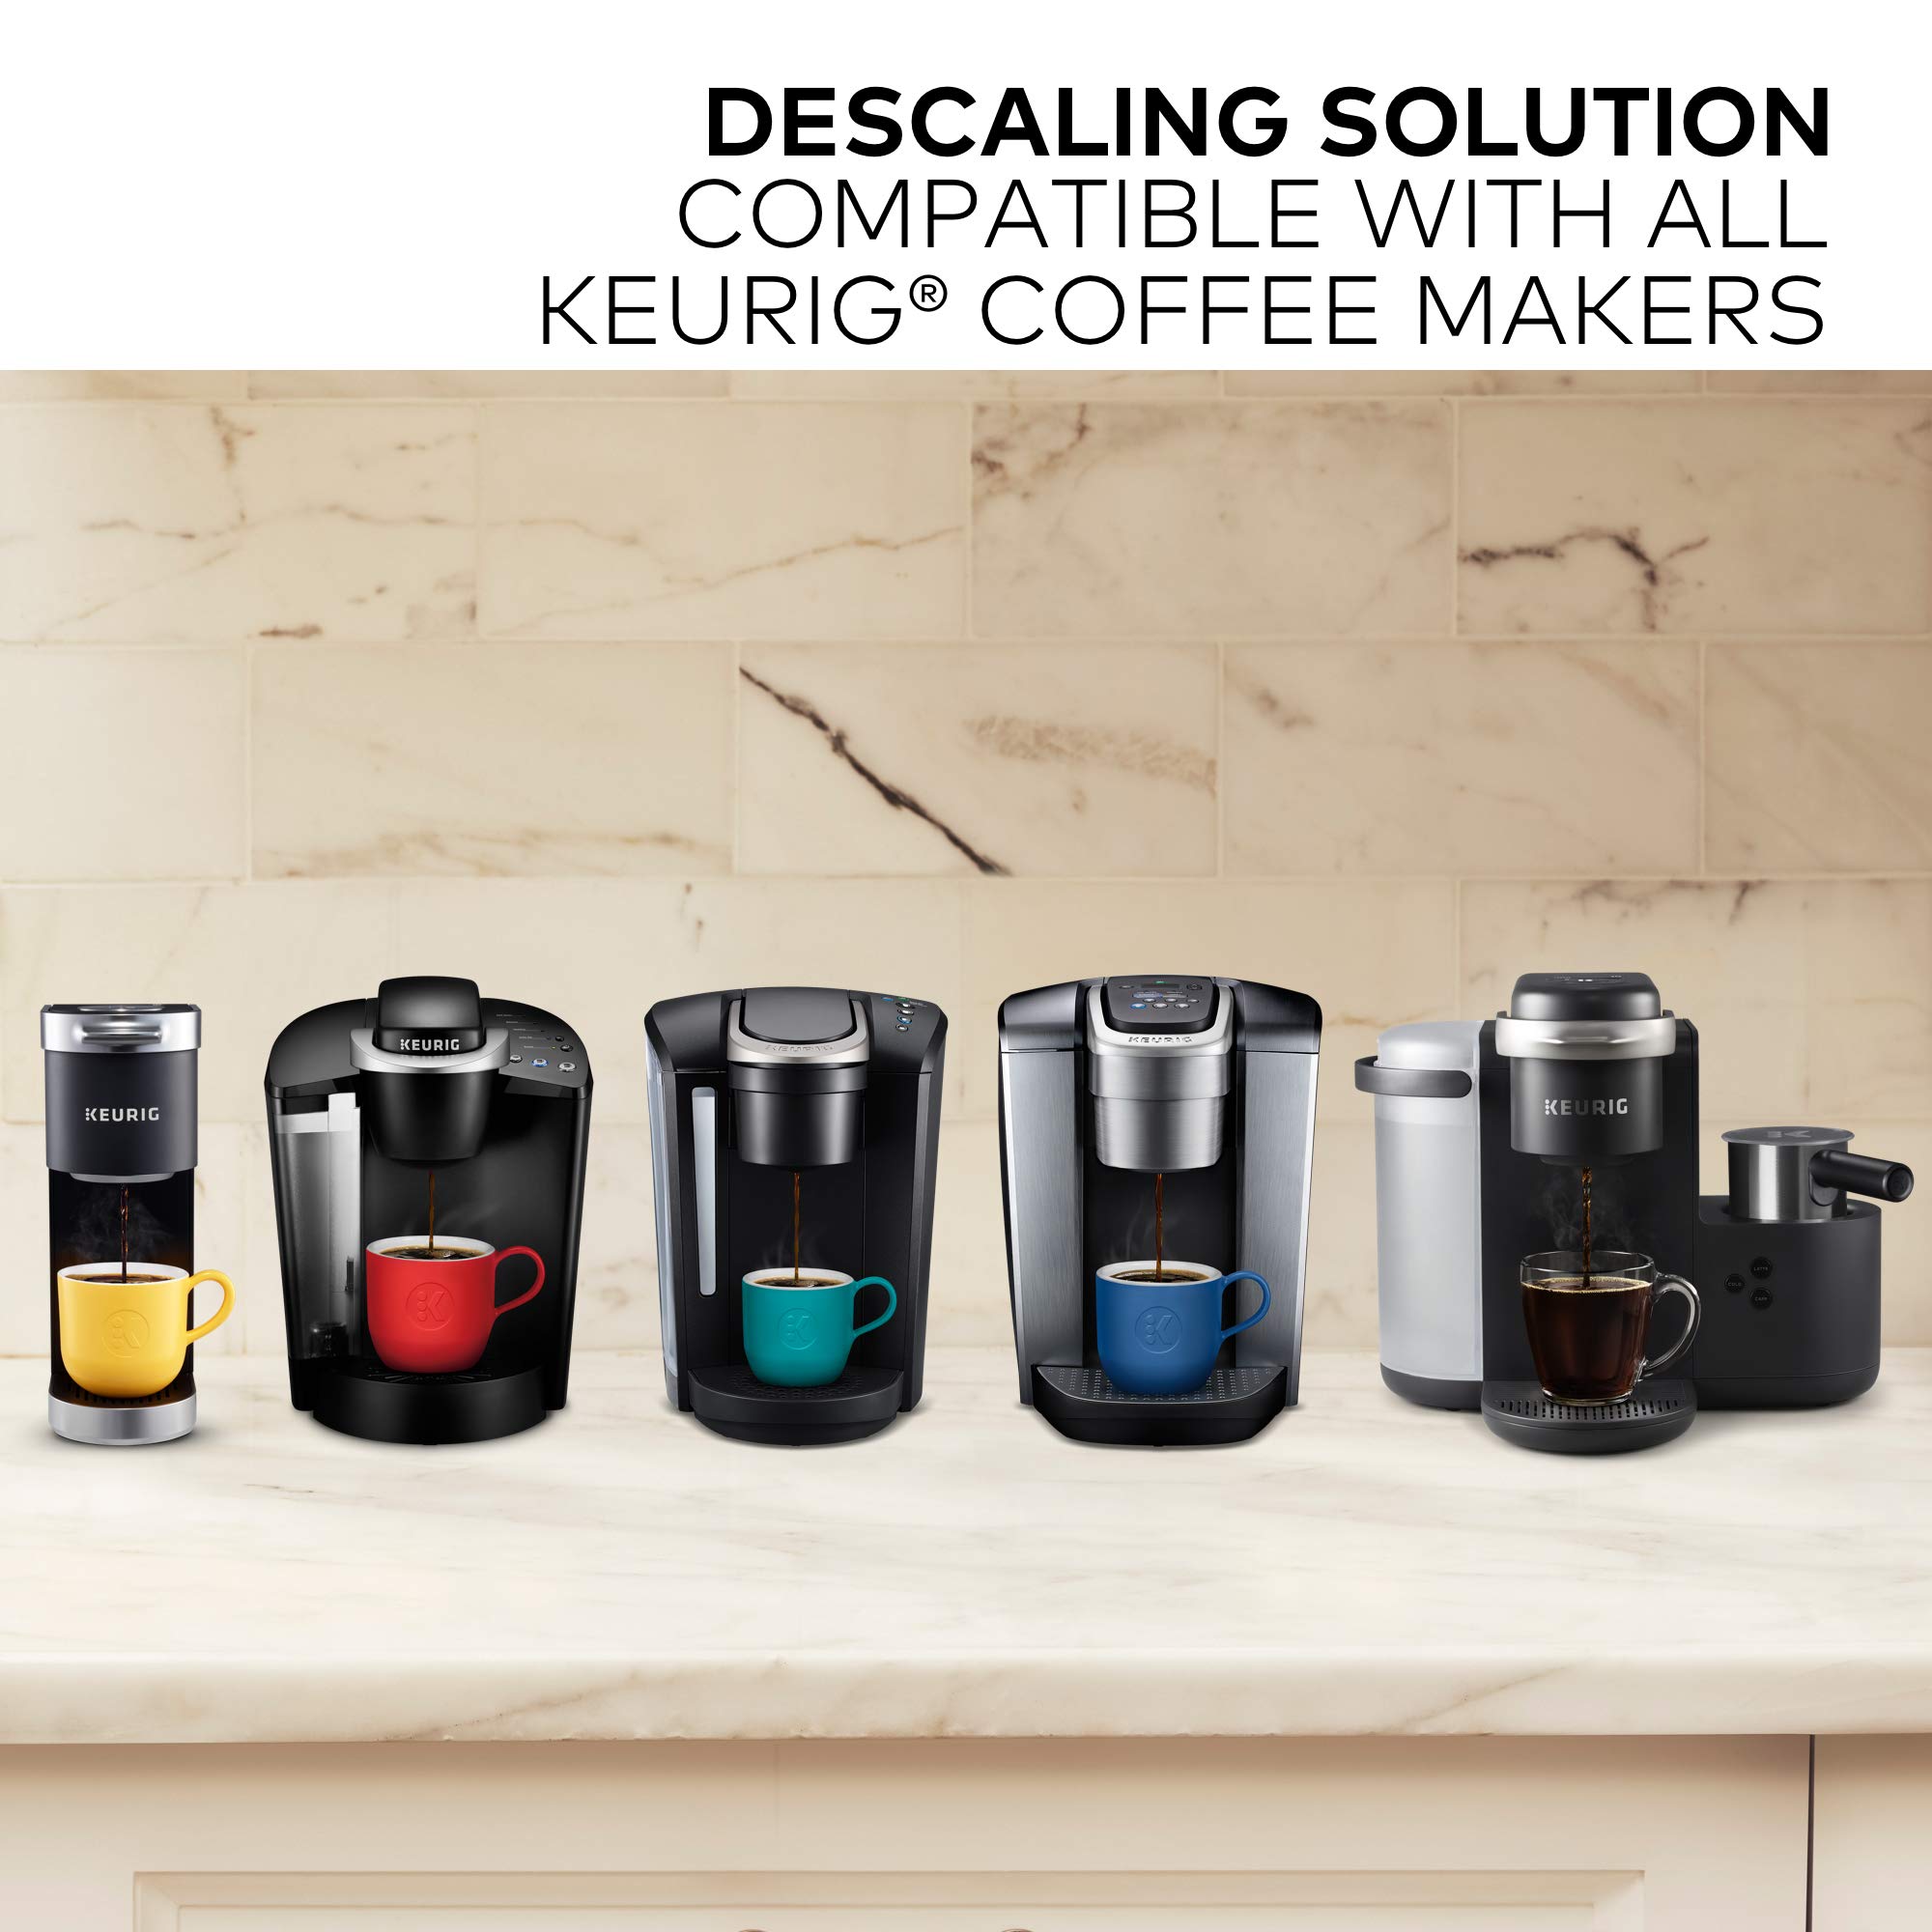 Keurig Care Kit Includes Descaling Solution & Water Filter Cartridges, Compatible Classic/1.0 & 2.0 K-Cup Pod Coffee Makers, 3 Count